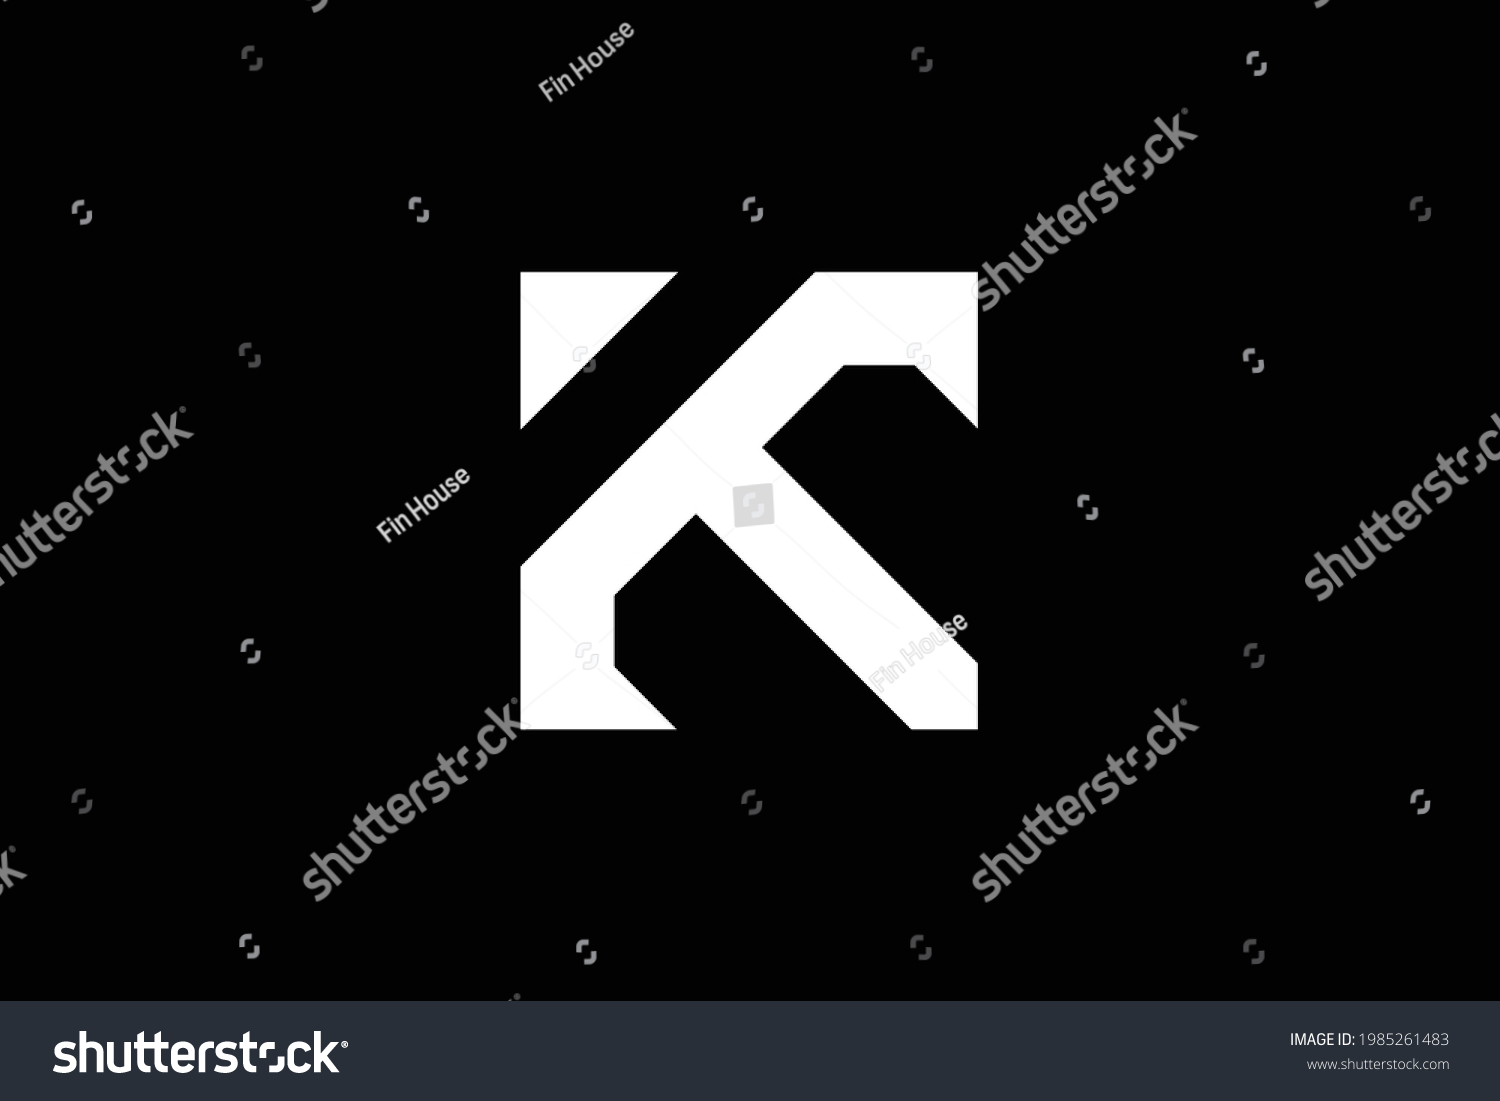 Kt Letter Logo On Luxury Background Stock Vector (Royalty Free ...